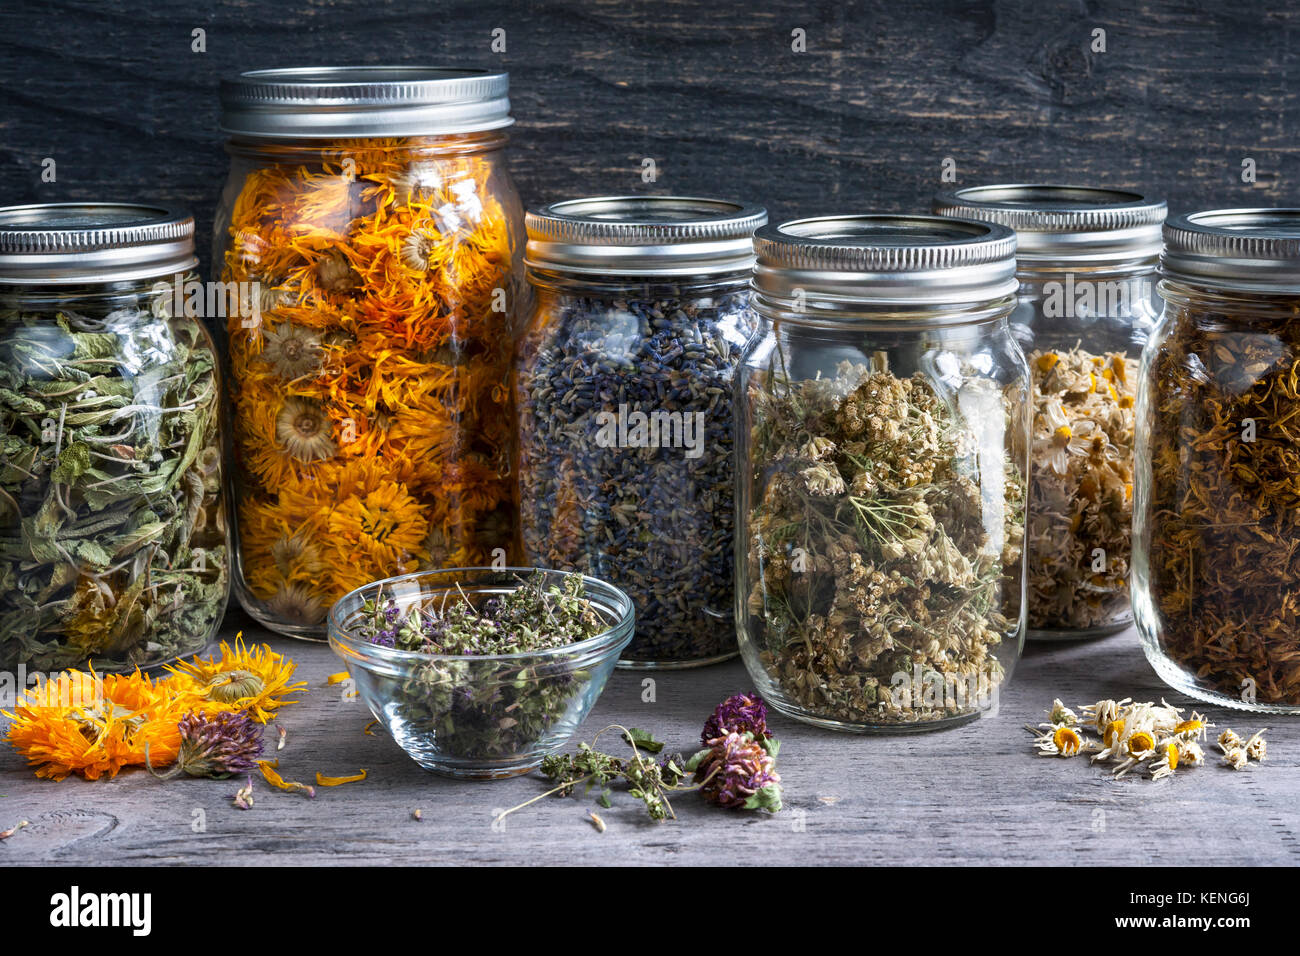 Various dried medicinal herbs and herbal teas in several glass jars on gray wood background, close up Stock Photo